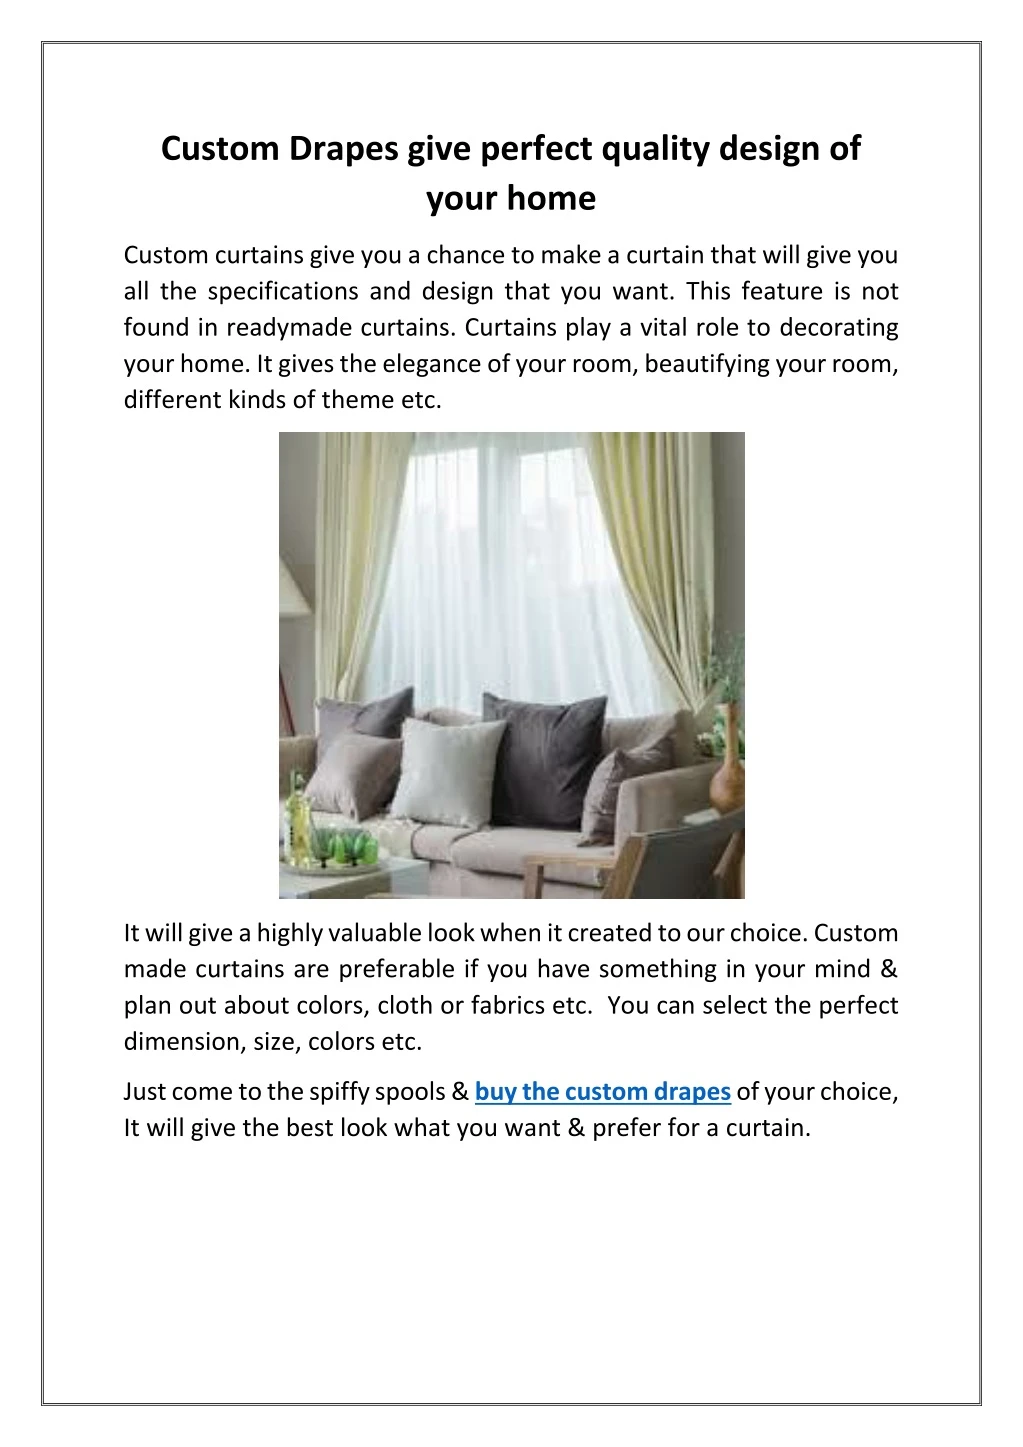 custom drapes give perfect quality design of your